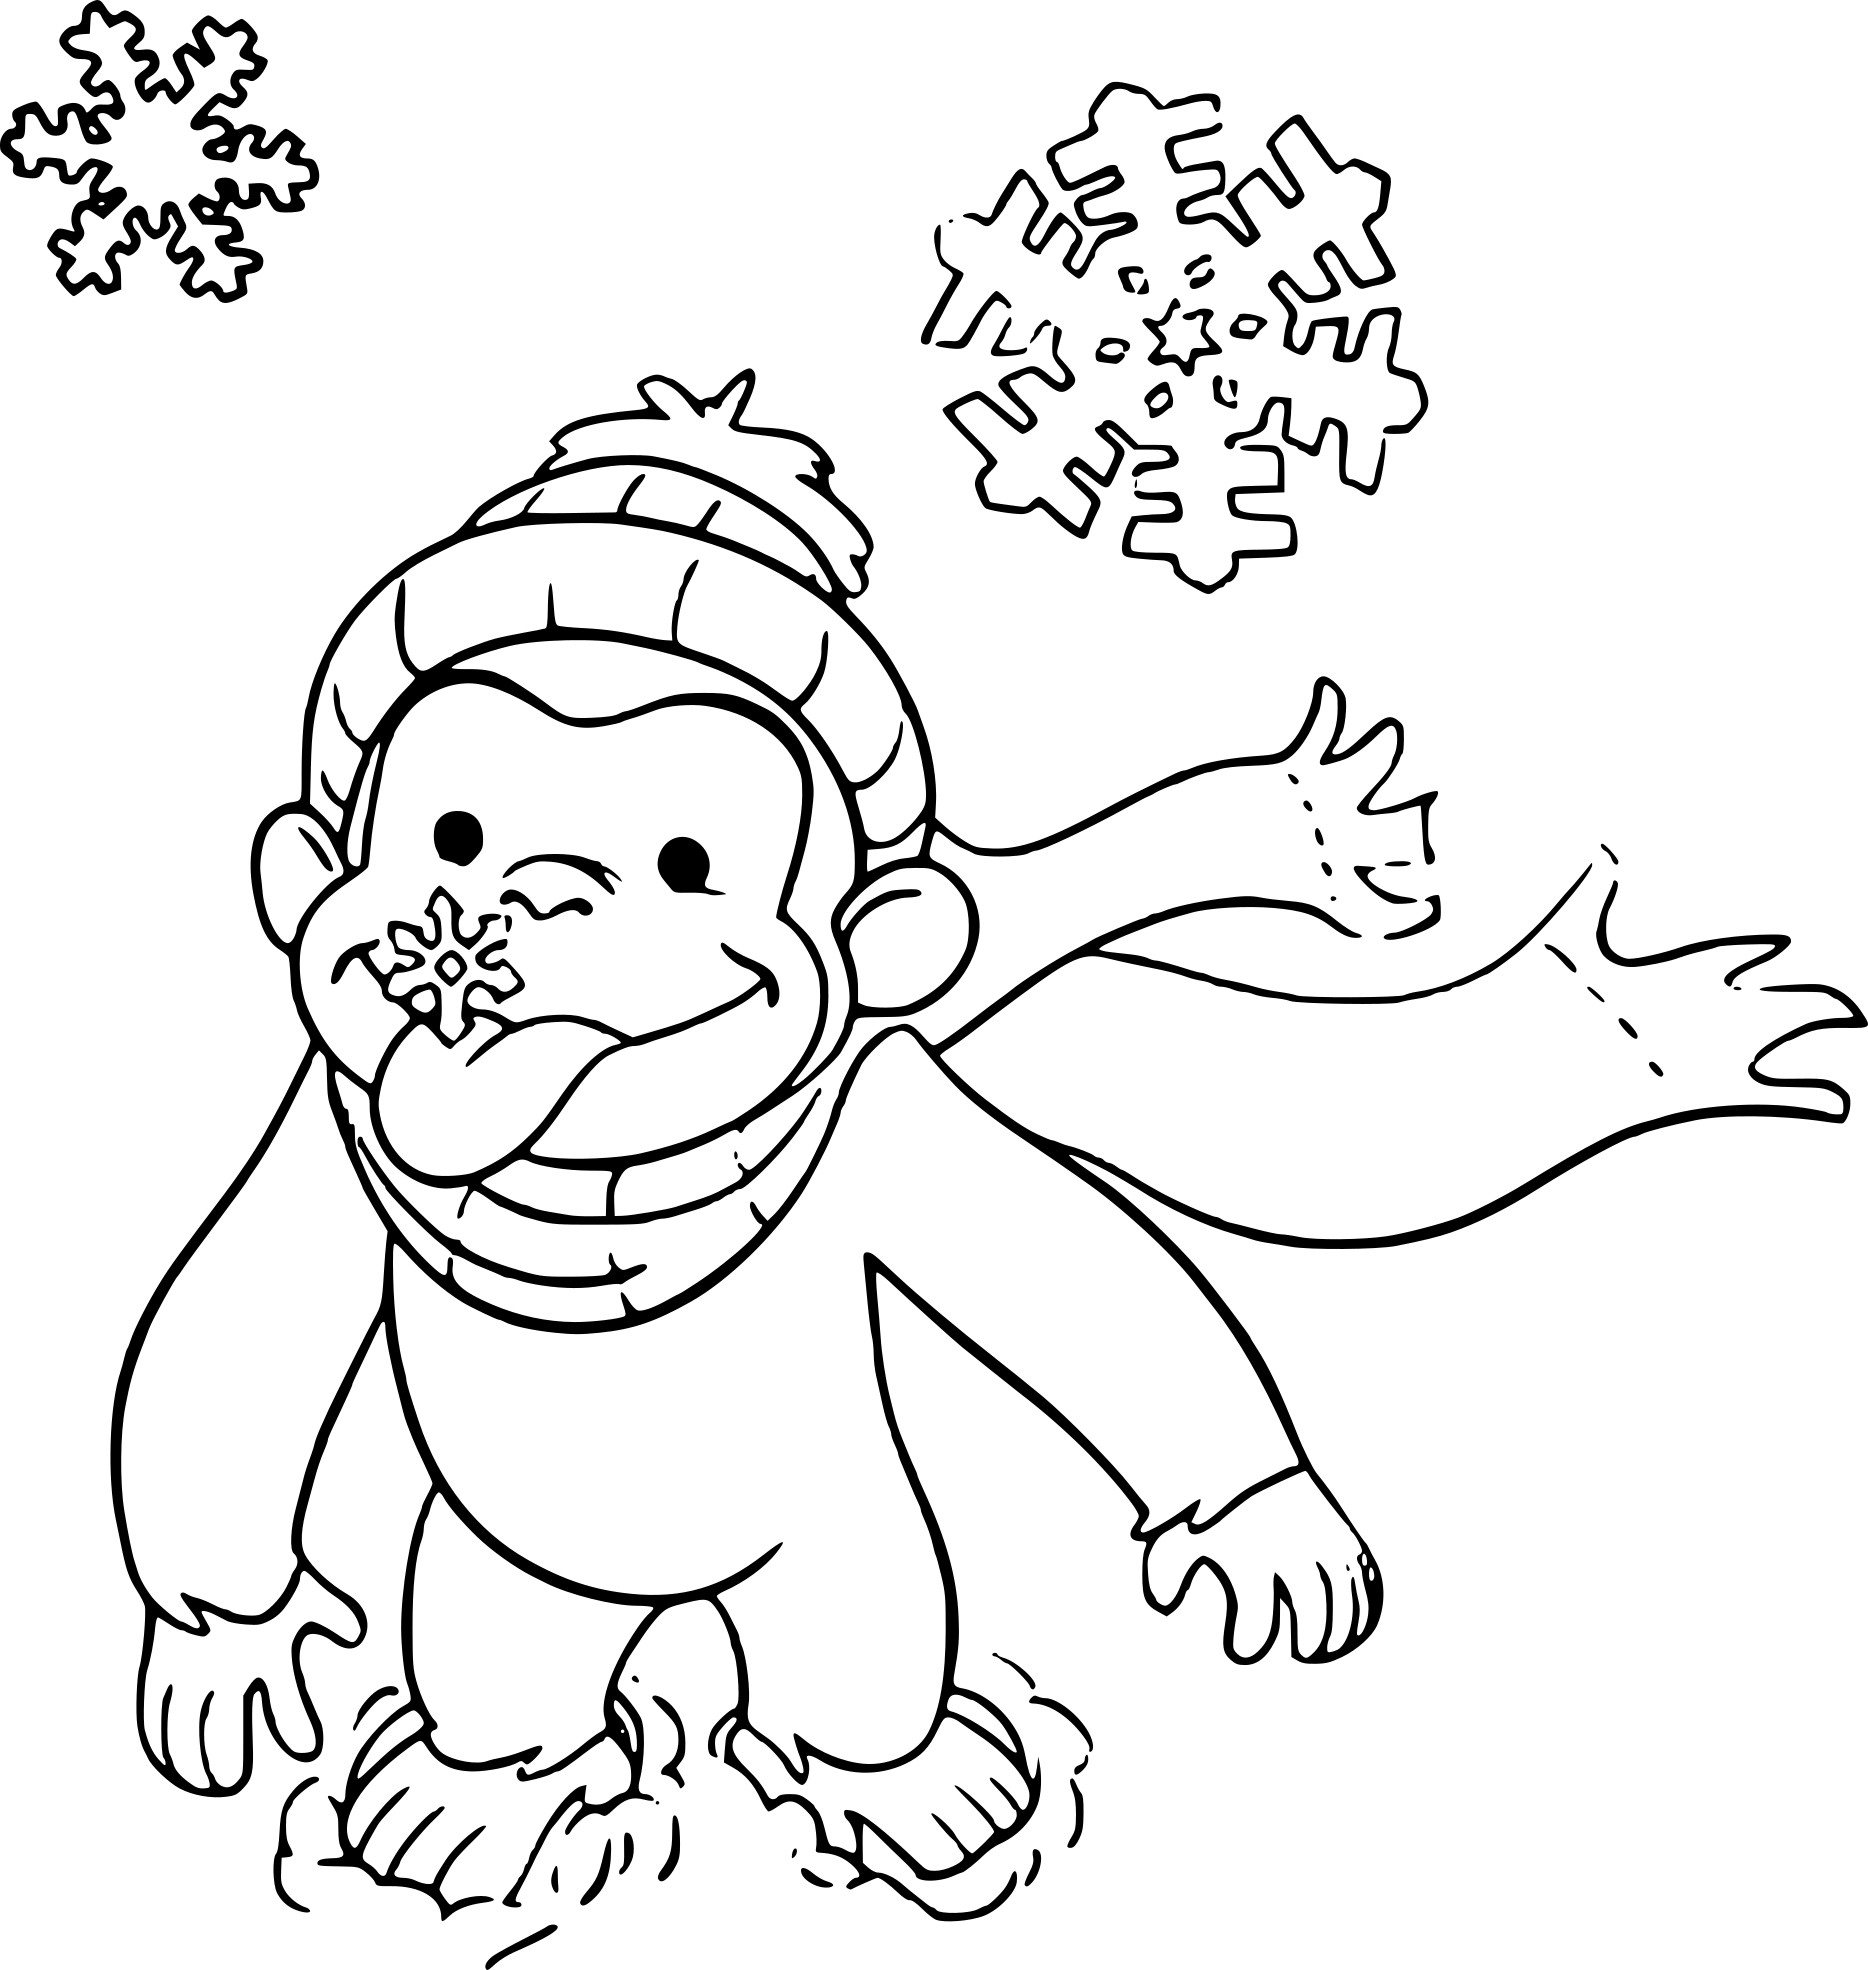 Monkey And Snowflake coloring page